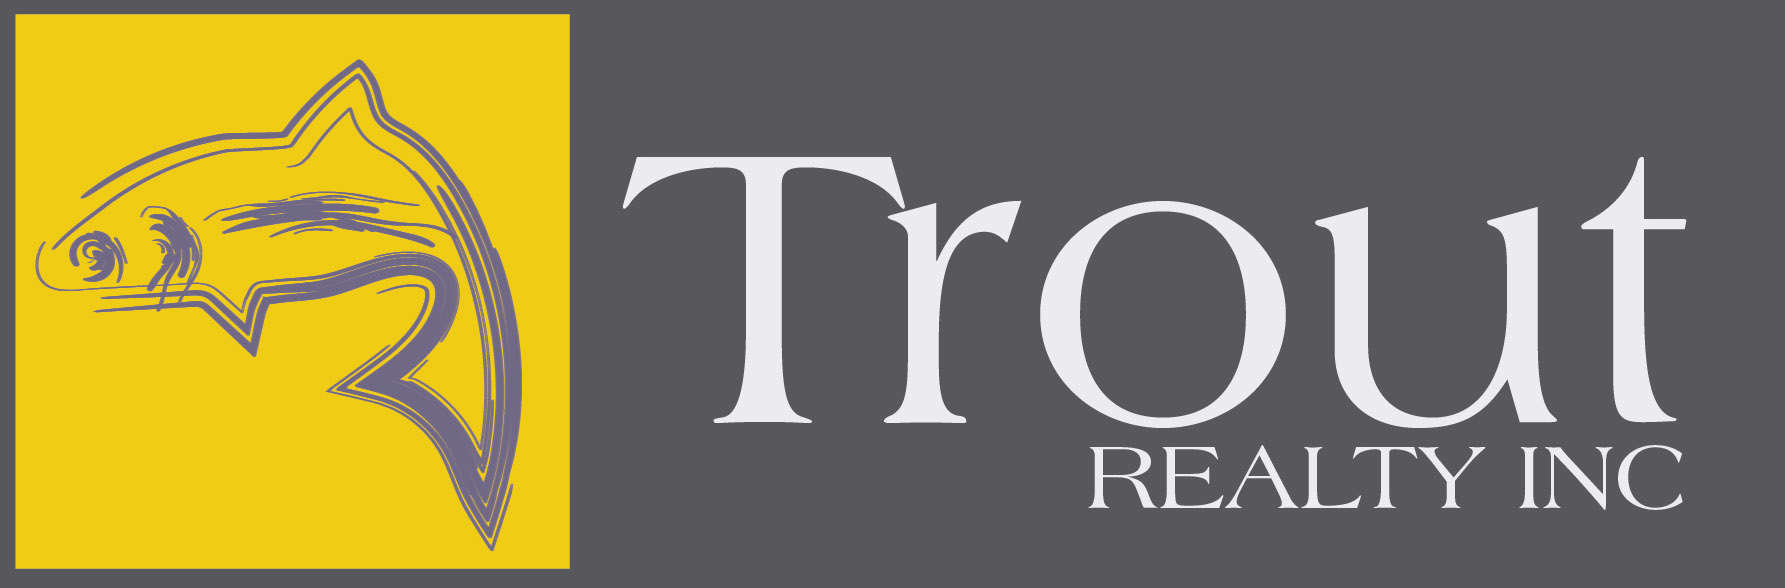 Trout Realty, Inc. Logo